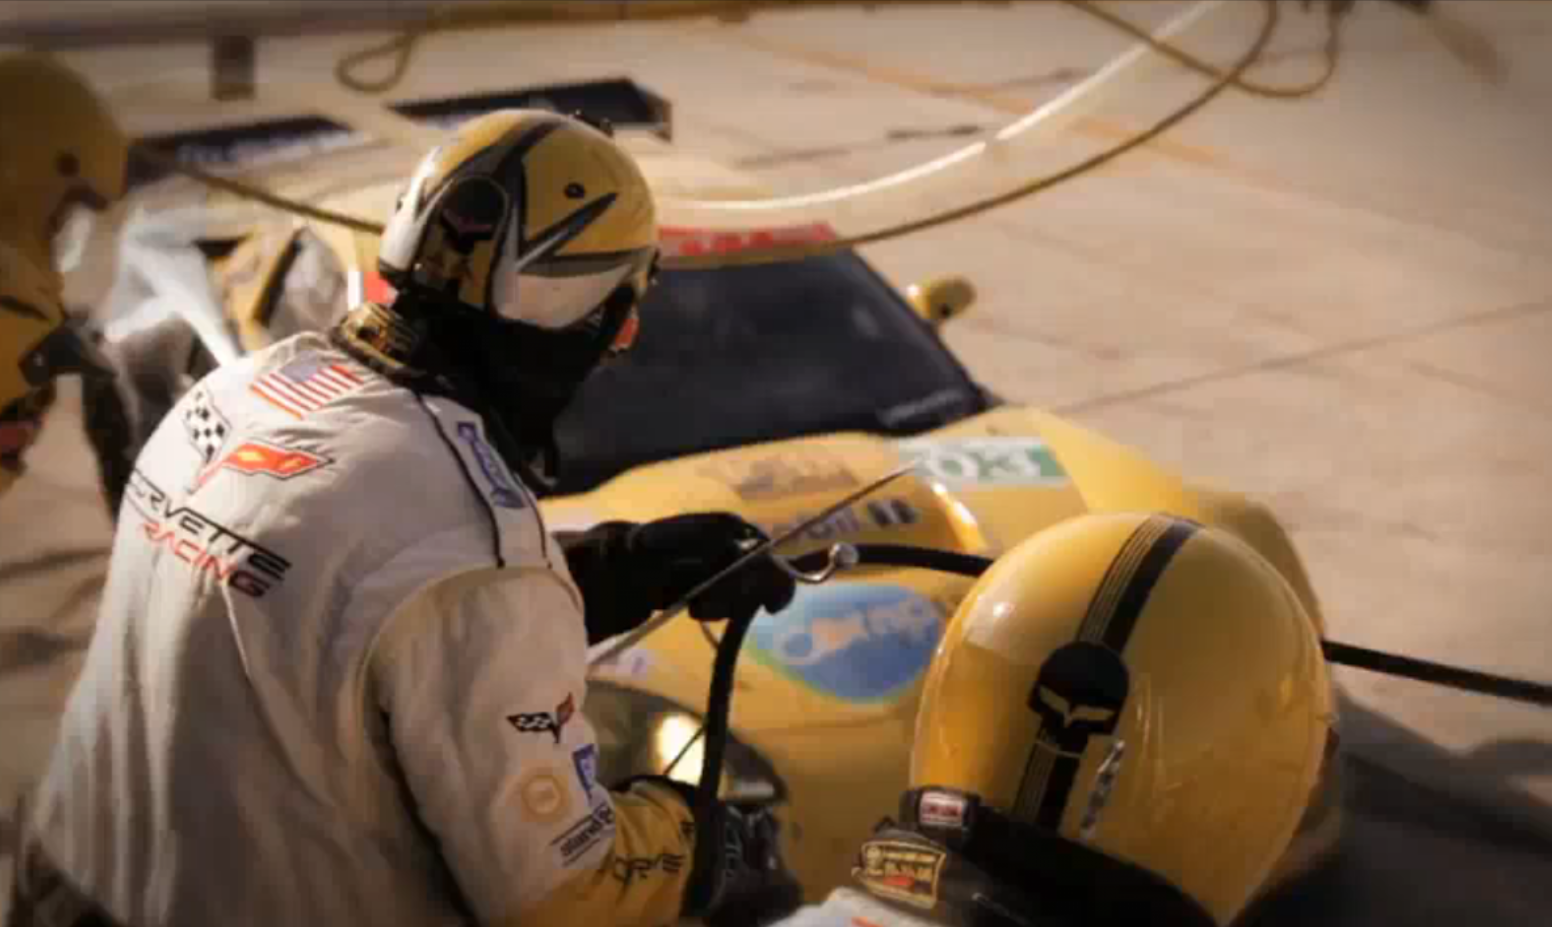 Chevrolet Racing Gives Us a Lesson in Logistics [Video]